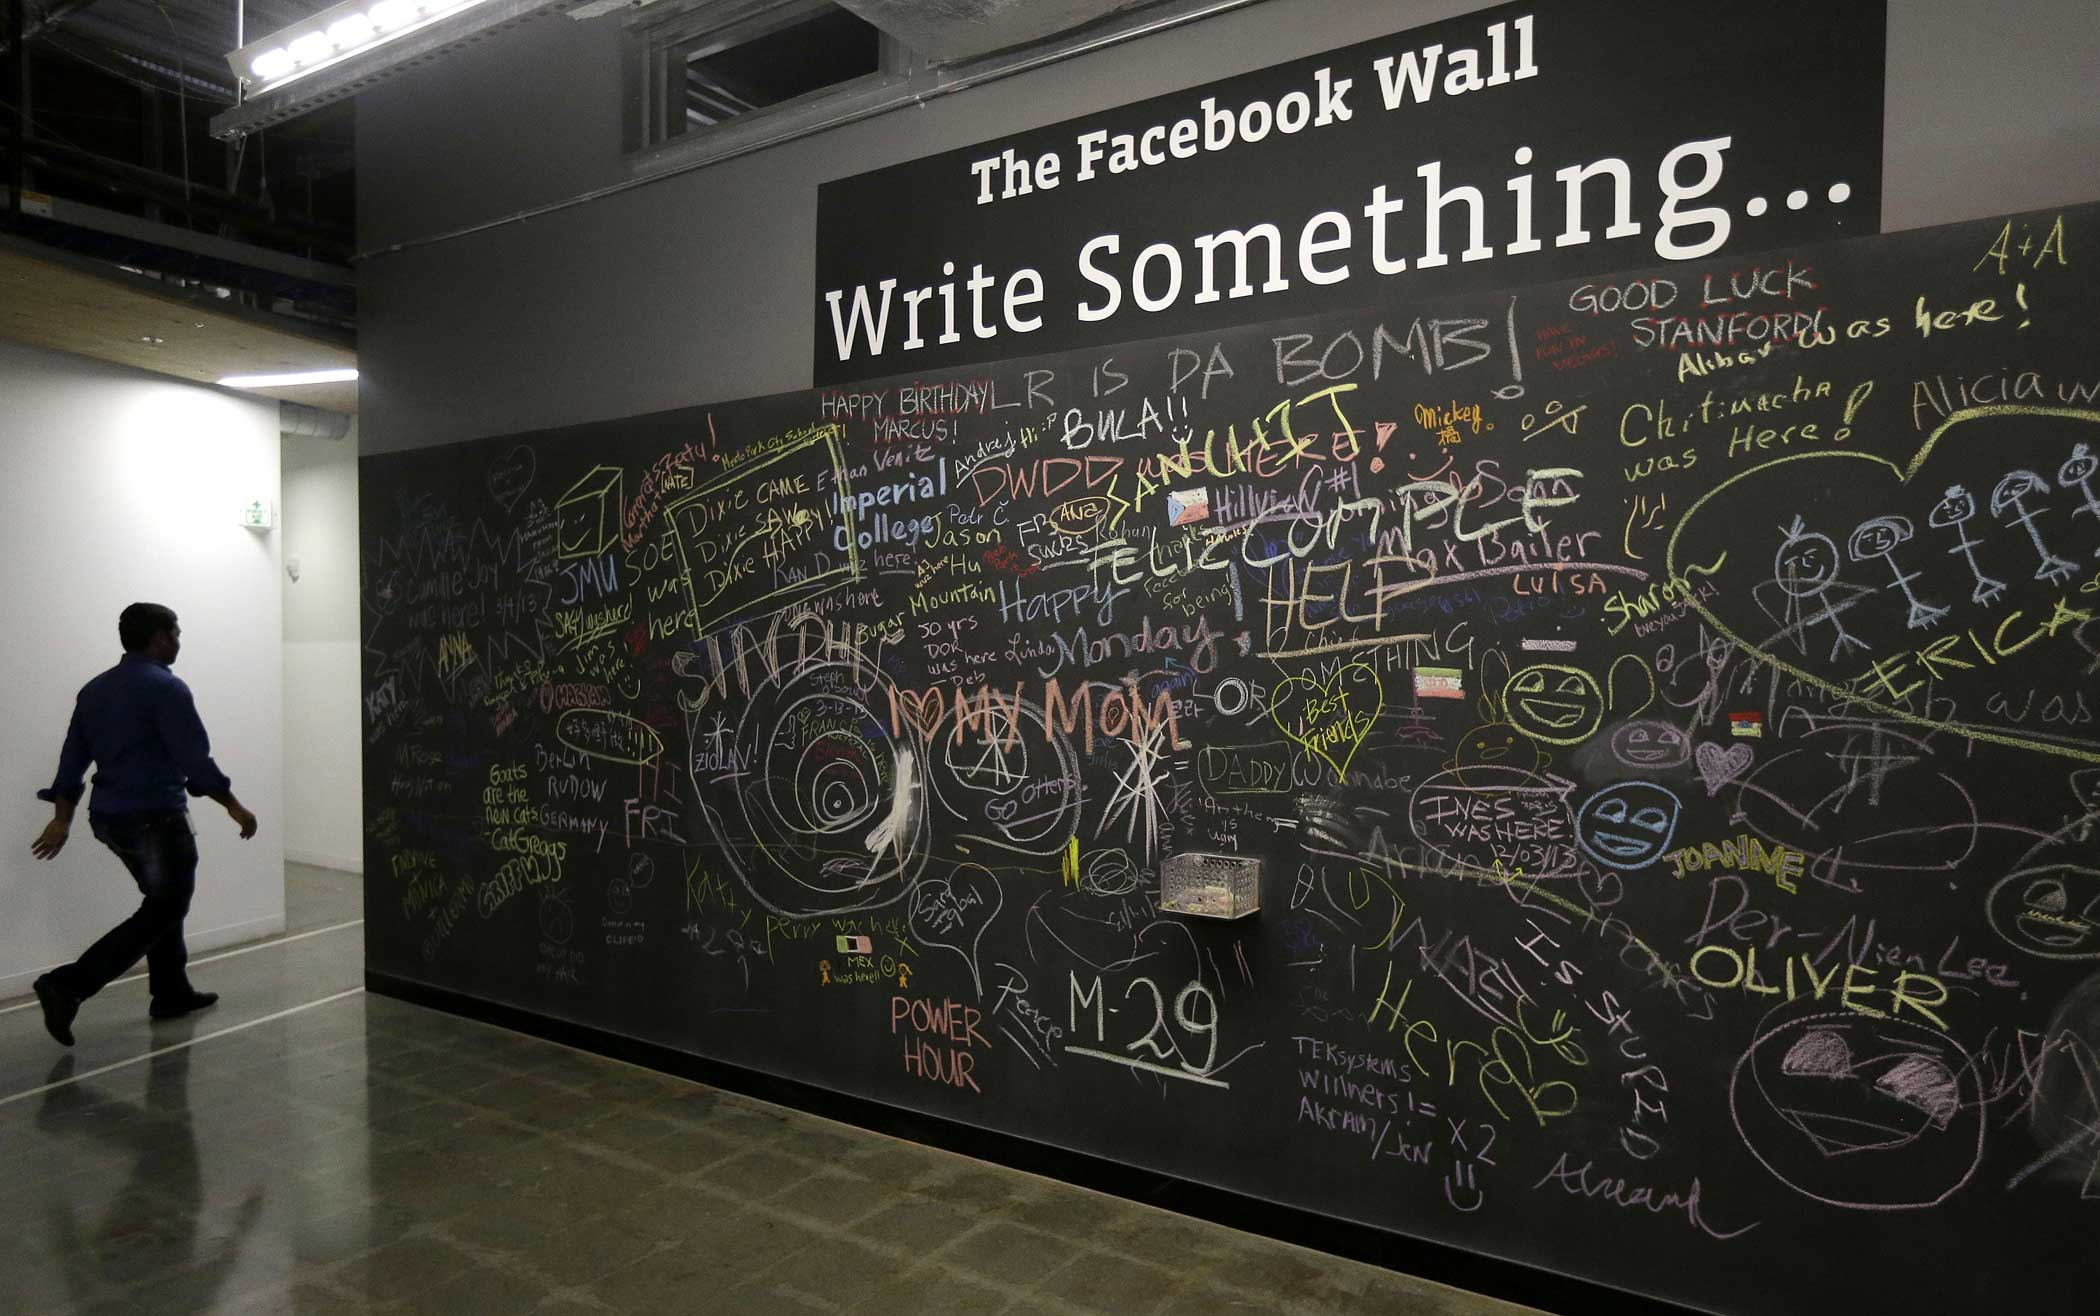 A Facebook employee walks past The Facebook Wall at the old Facebook headquarters in Menlo Park, Calif. on March 15, 2013.